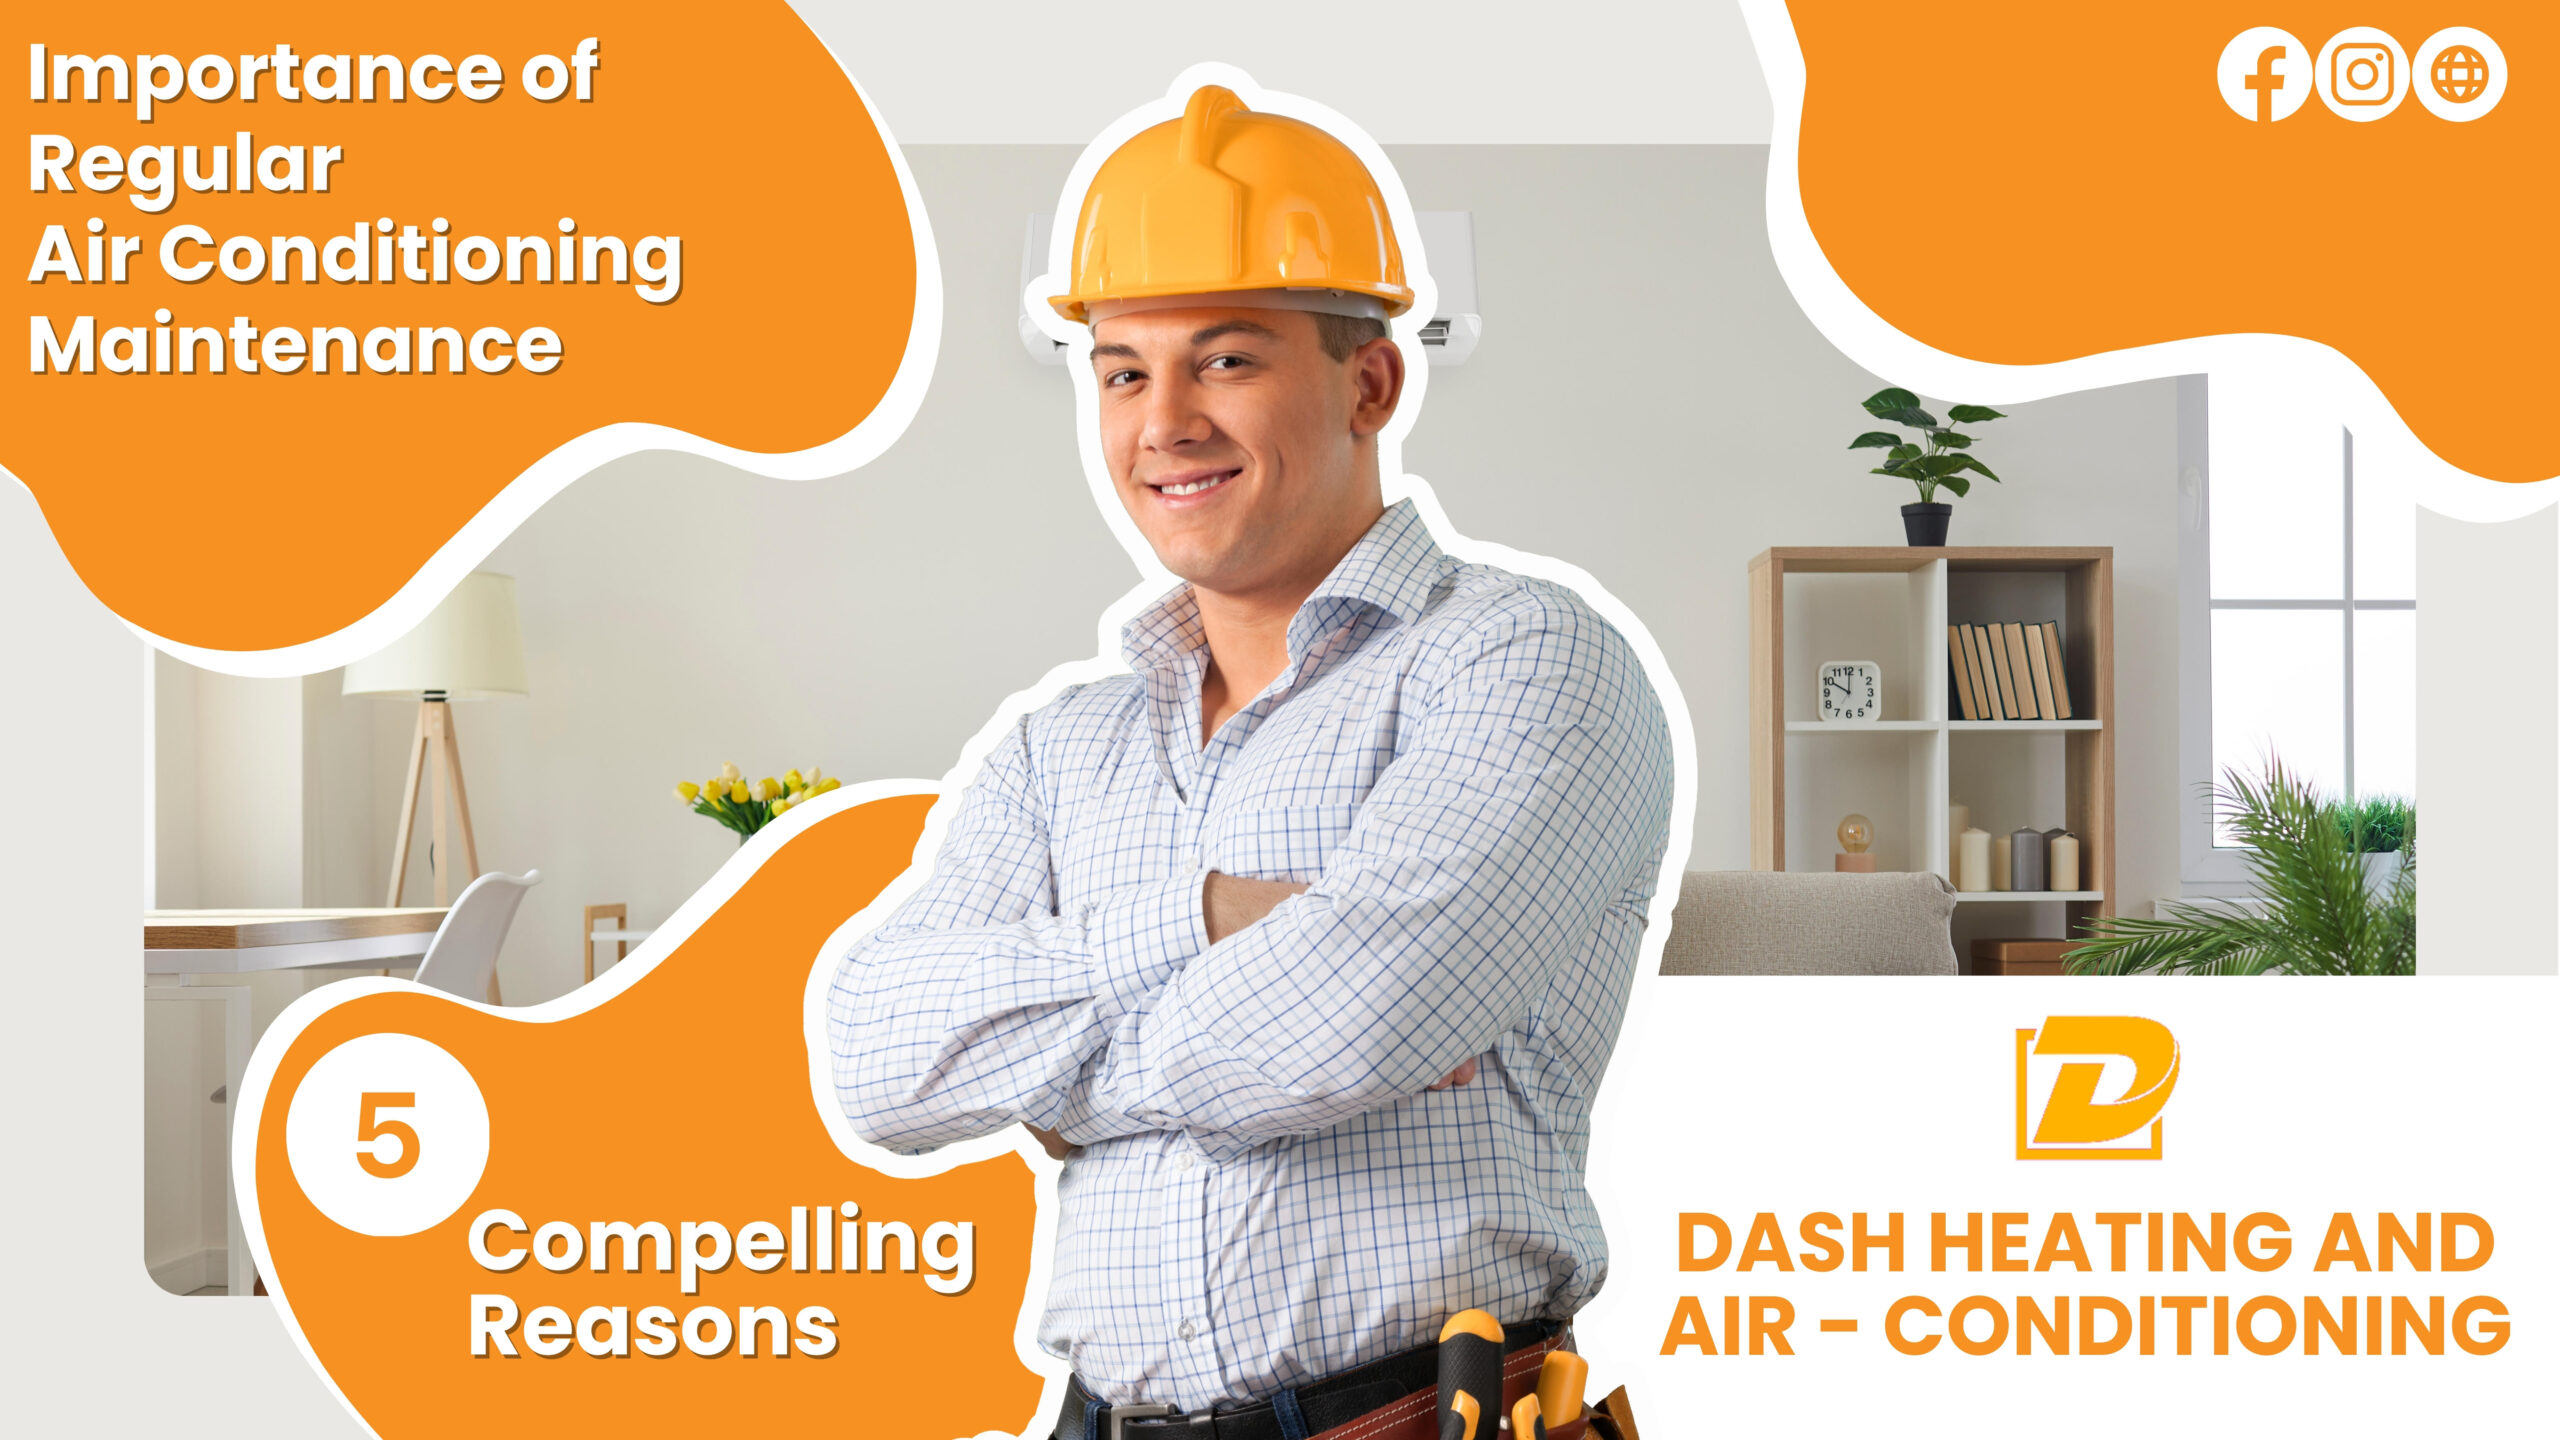 The Importance of Regular Air Conditioning Maintenance: 5 Compelling Reasons